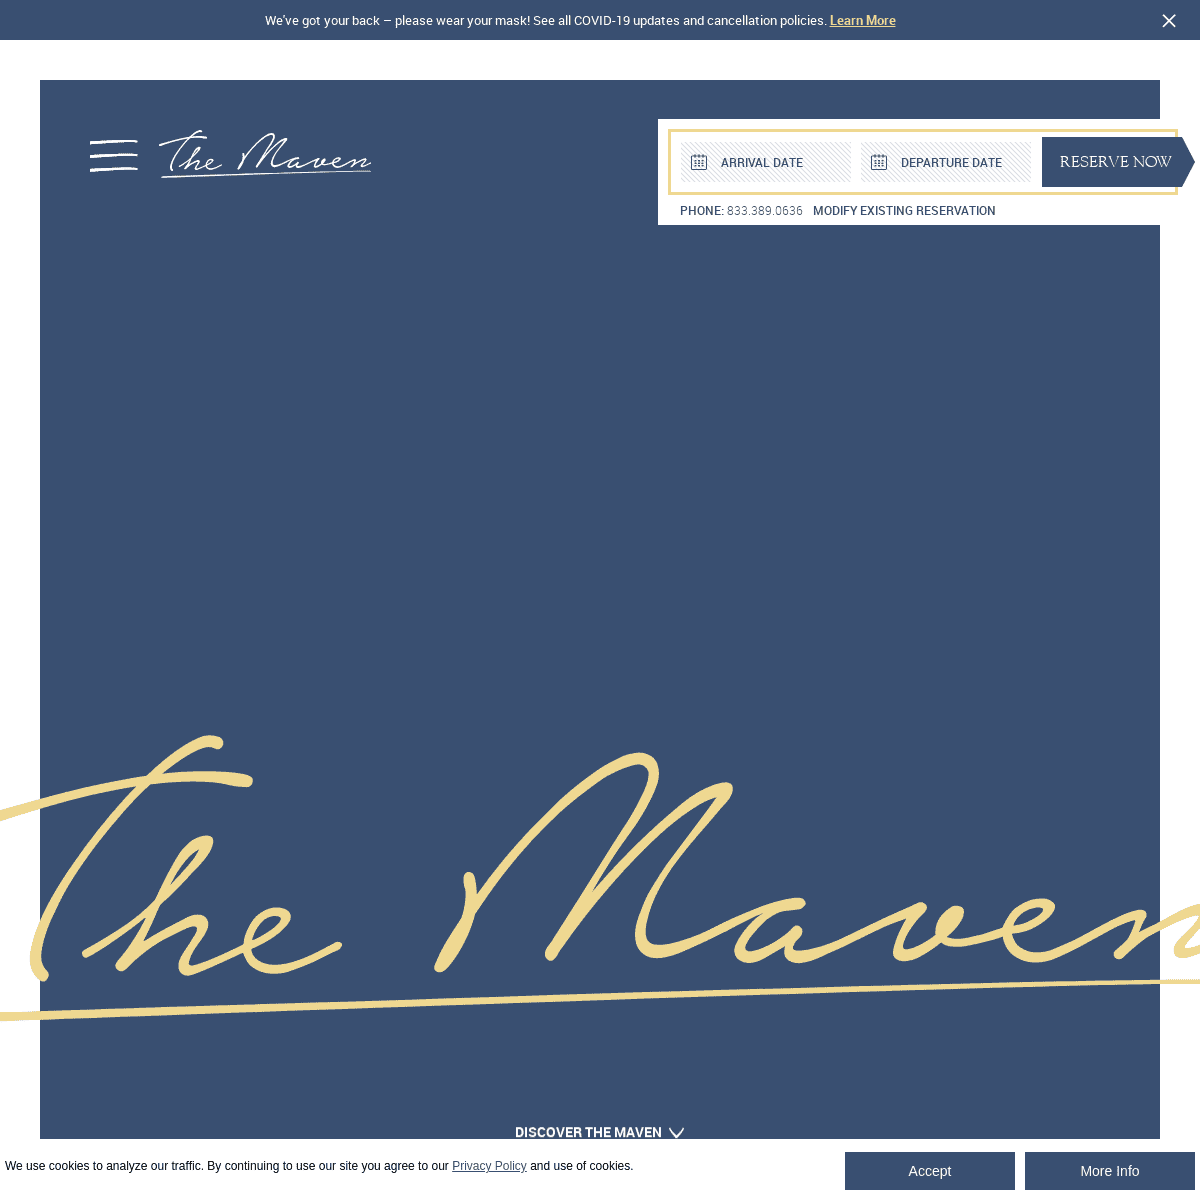 A complete backup of https://themavenhotel.com